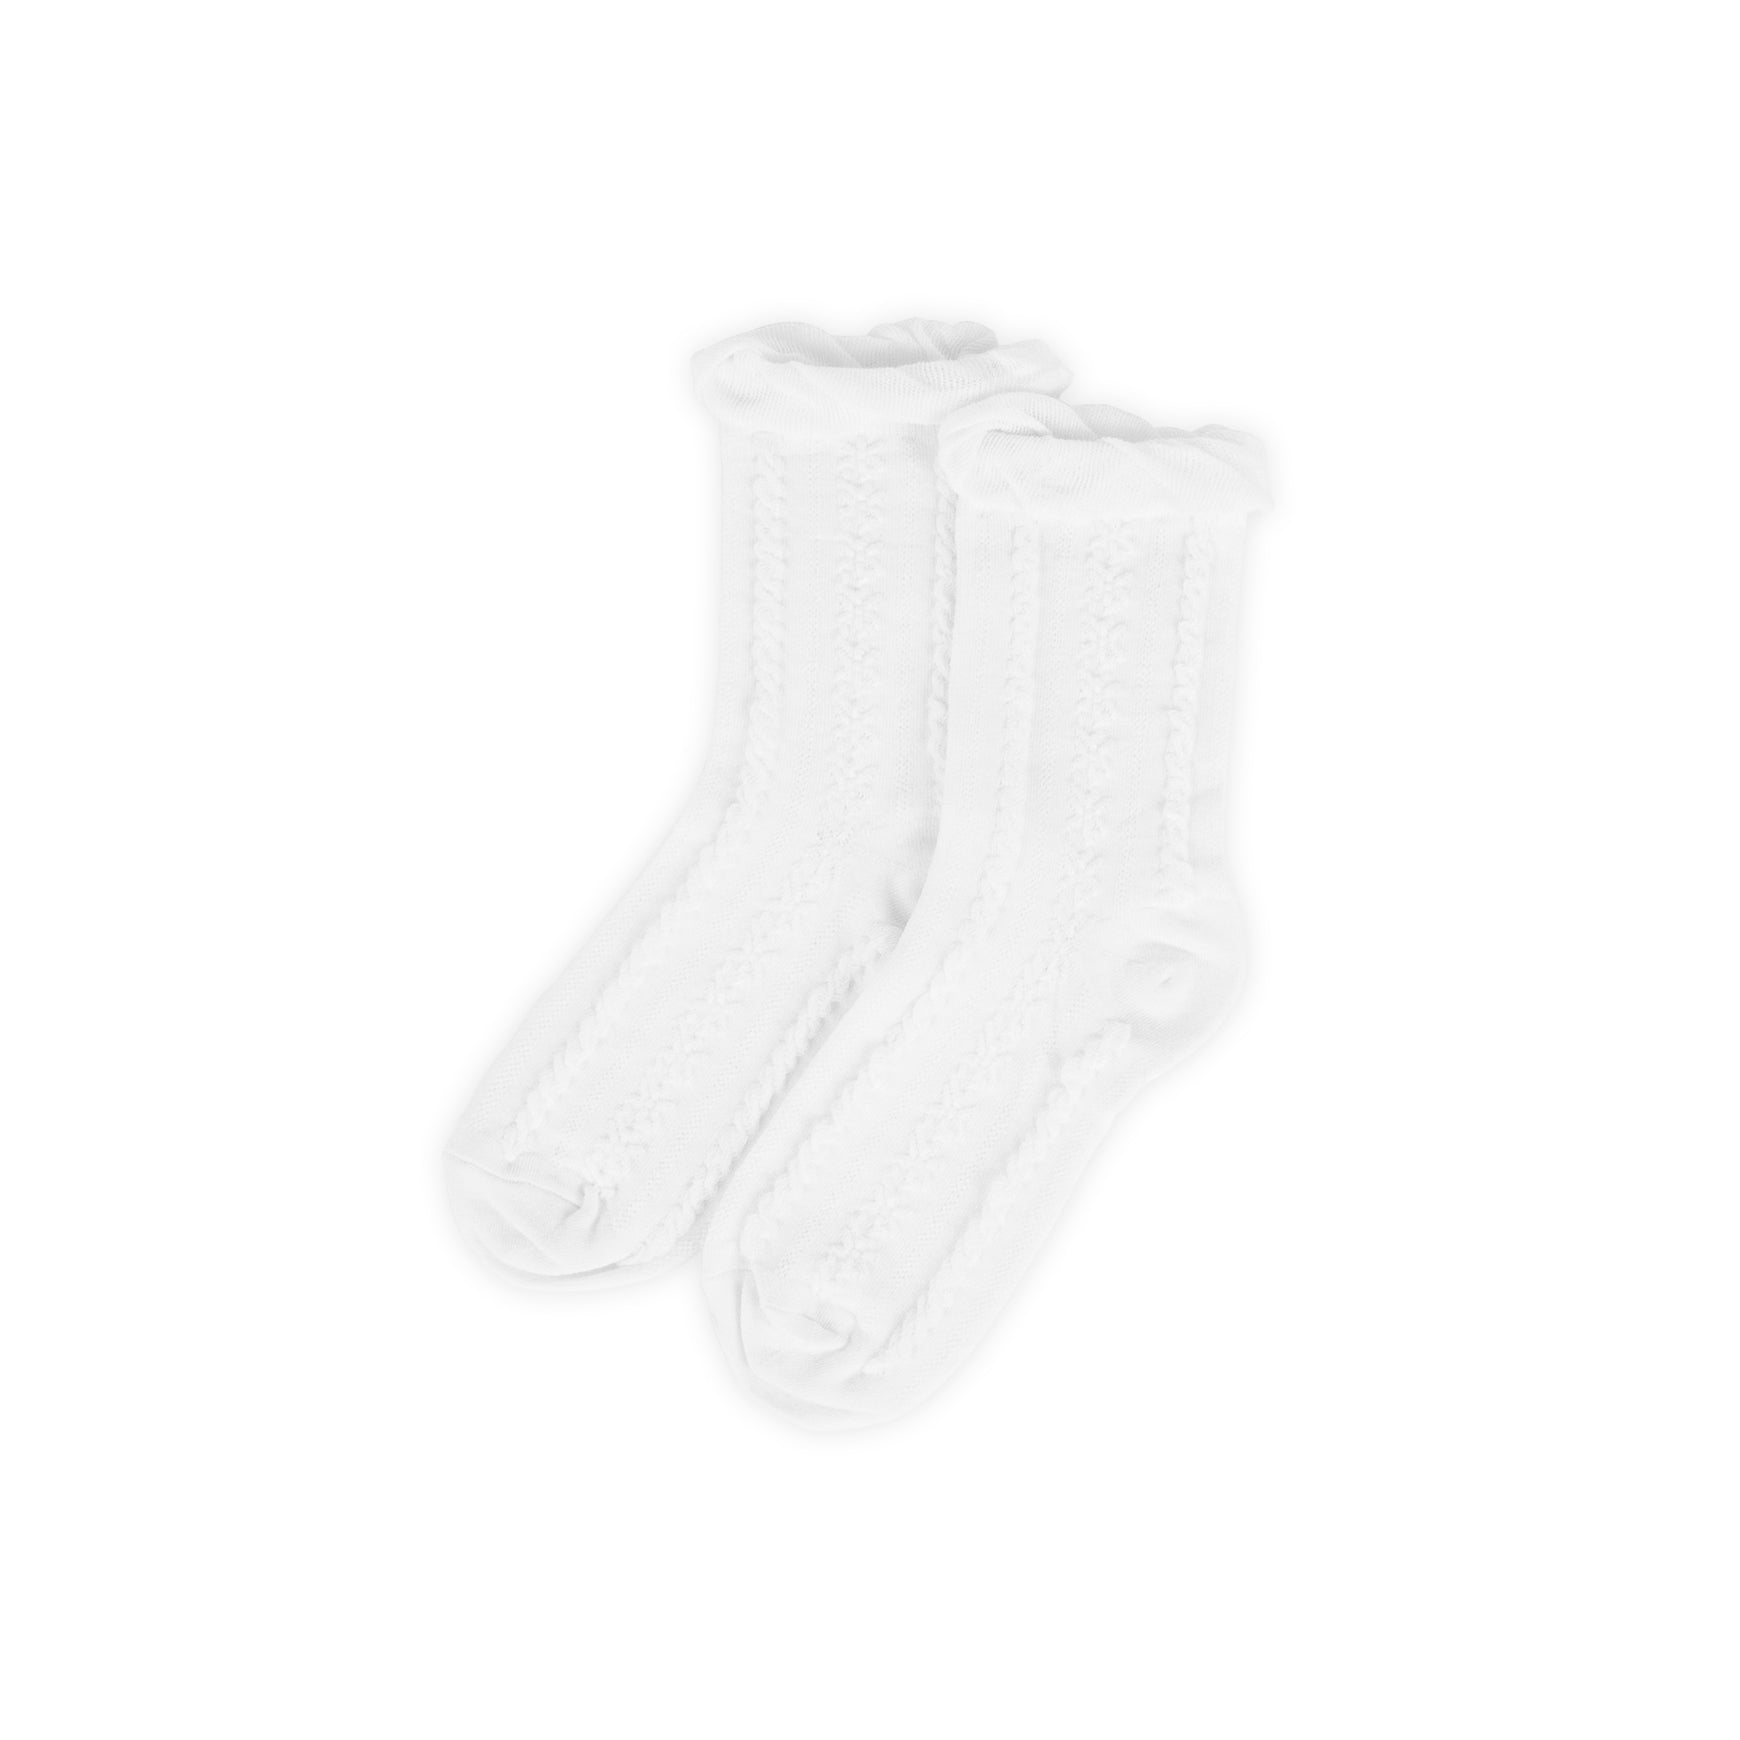 B.Adore Lace Socks Collection WHITE (PWP RM15.90)